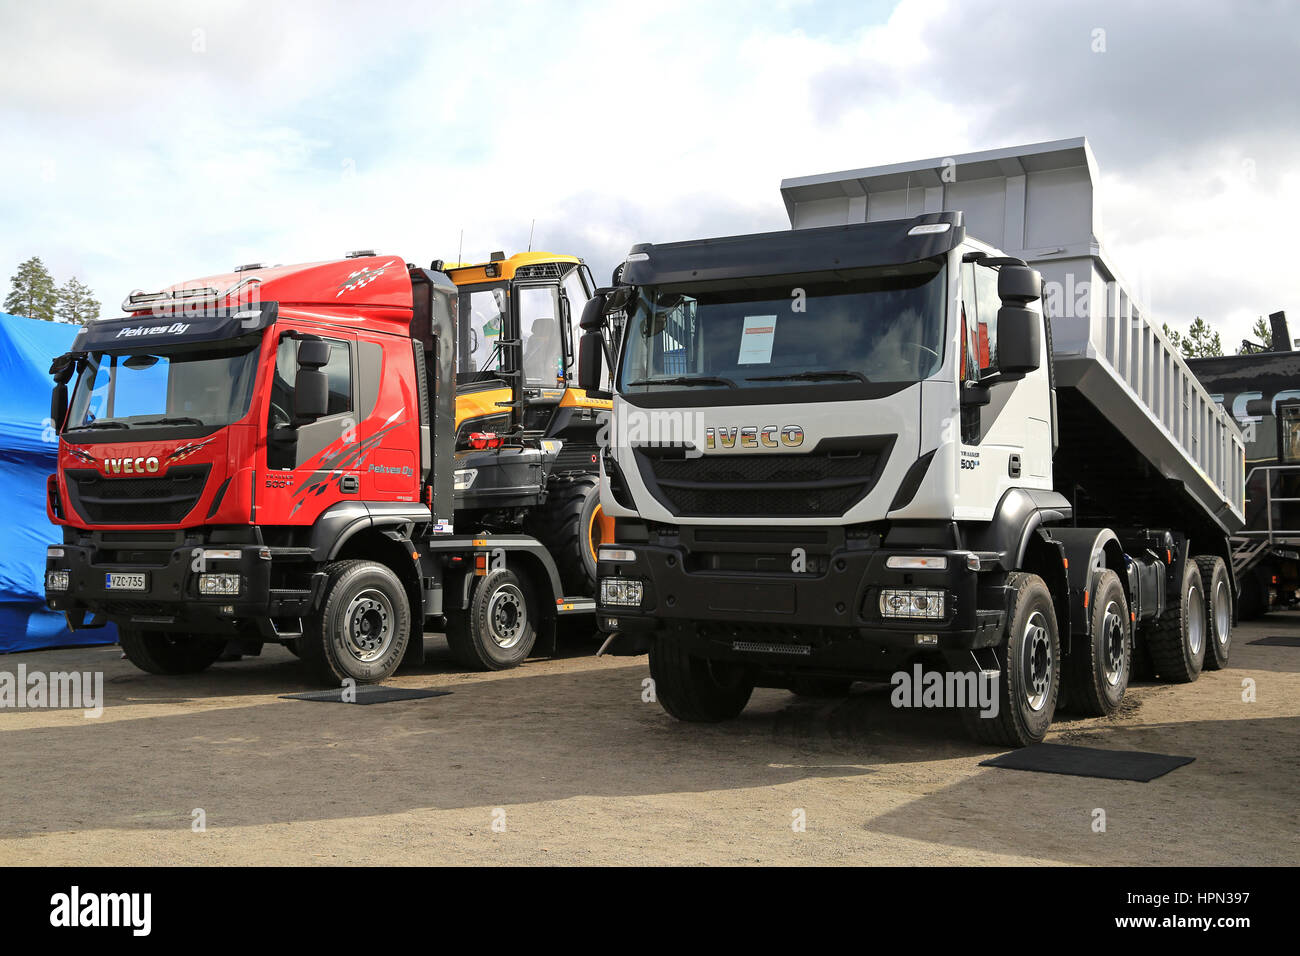 JAMSA, FINLAND - SEPTEMBER 2, 2016: Red and white new Iveco Trakker 500 trucks on display on the heavy machinery exhibition FinnMETKO 2016. Stock Photo